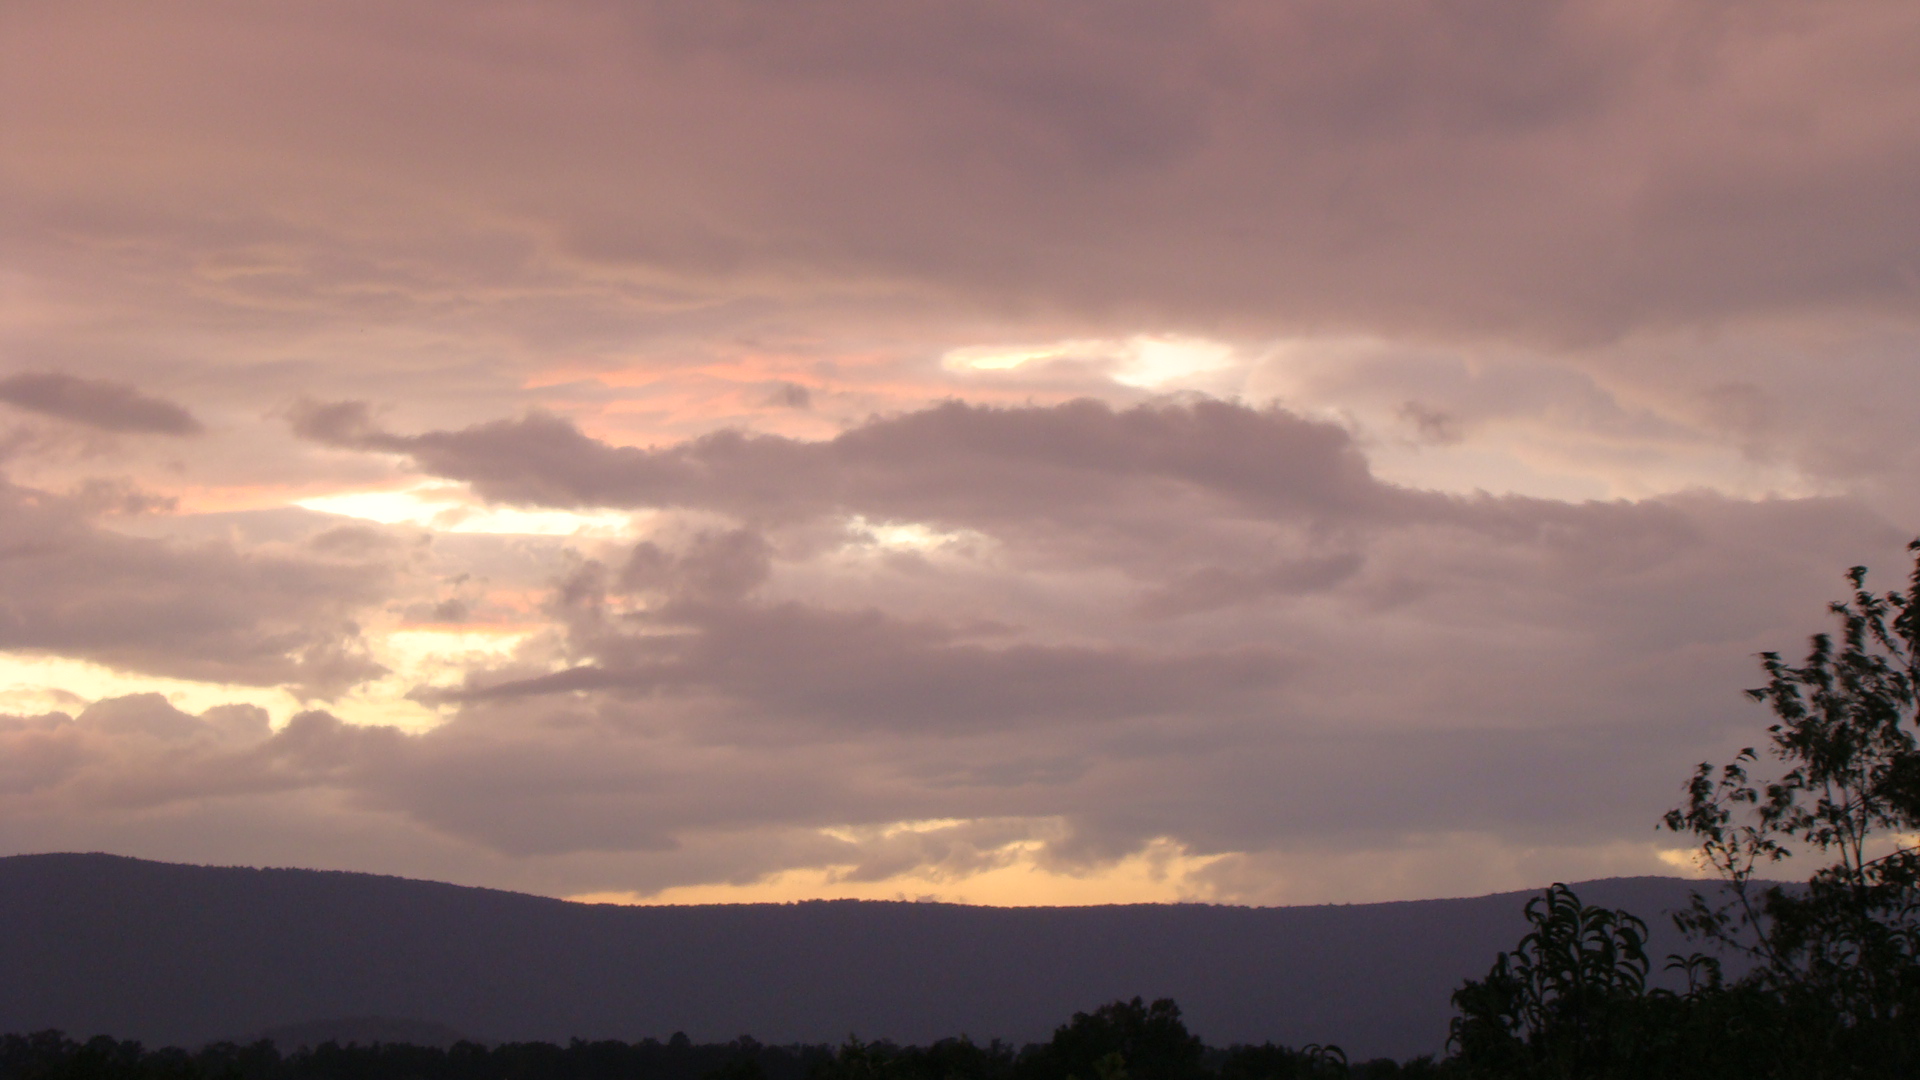 Cloudy Sunset in the Shenandoah Valley | Shenandoah Valley Flowers